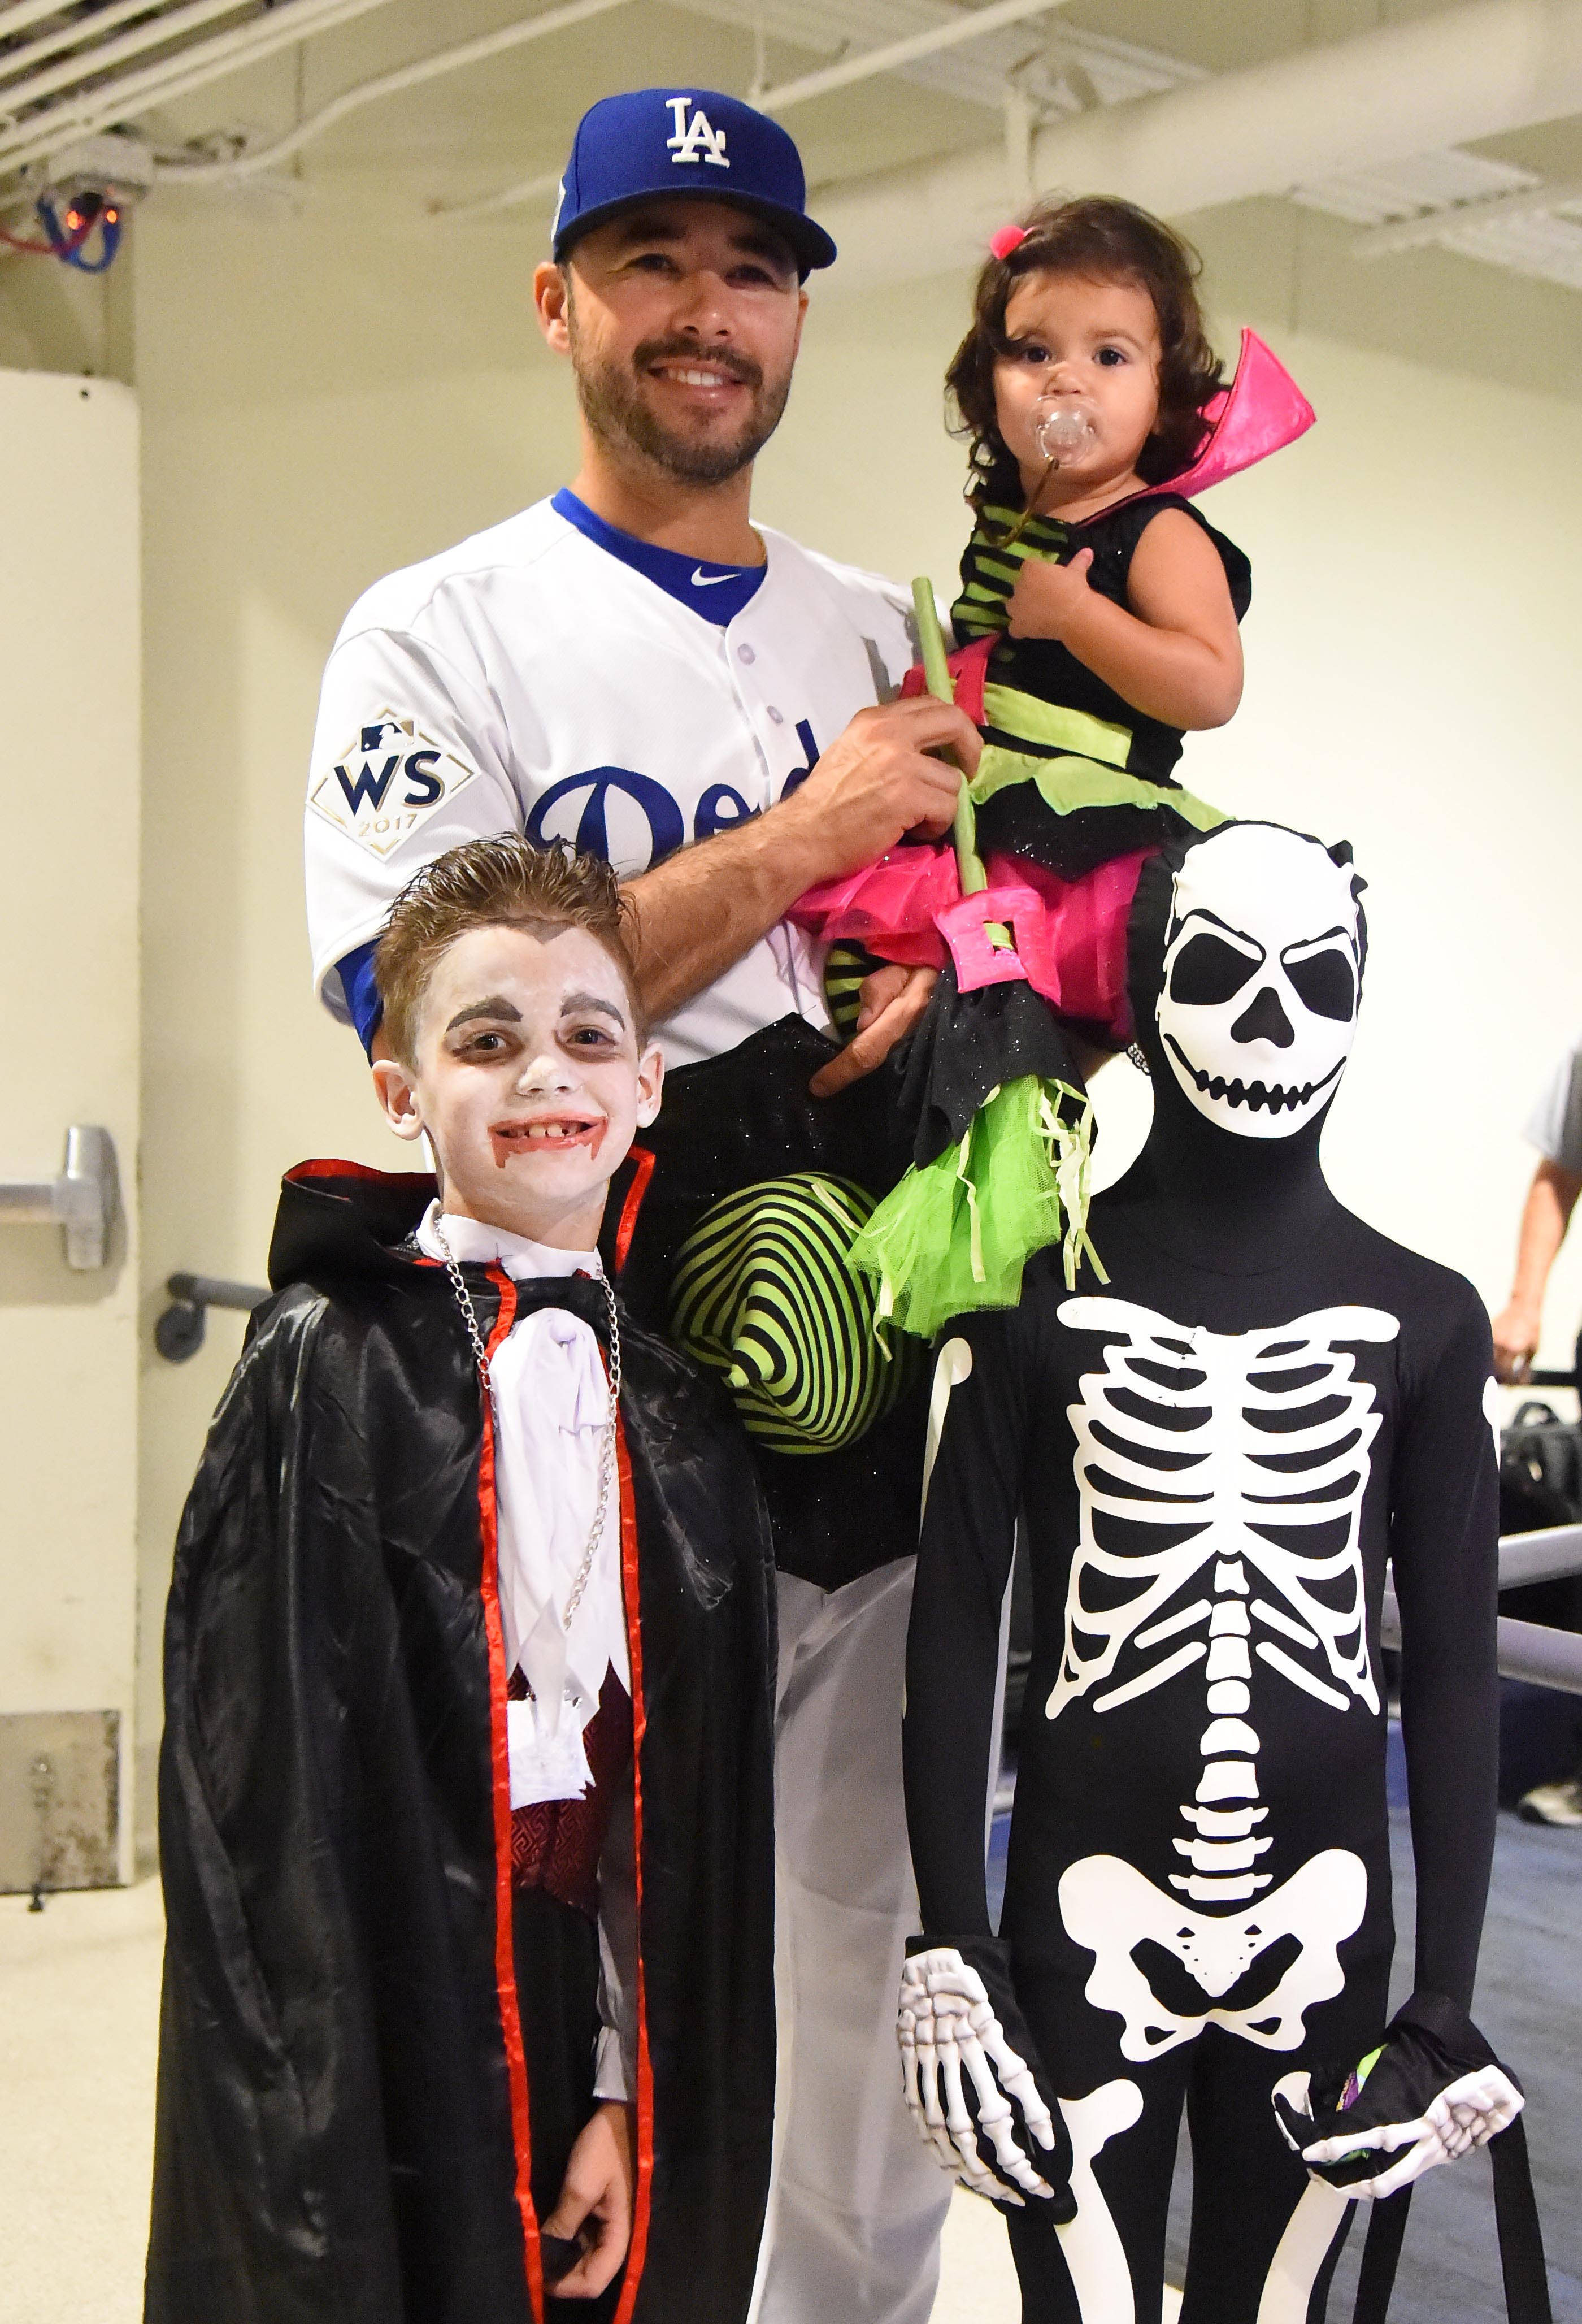 11 fantastic photos of fans in costumes at World Series on Halloween